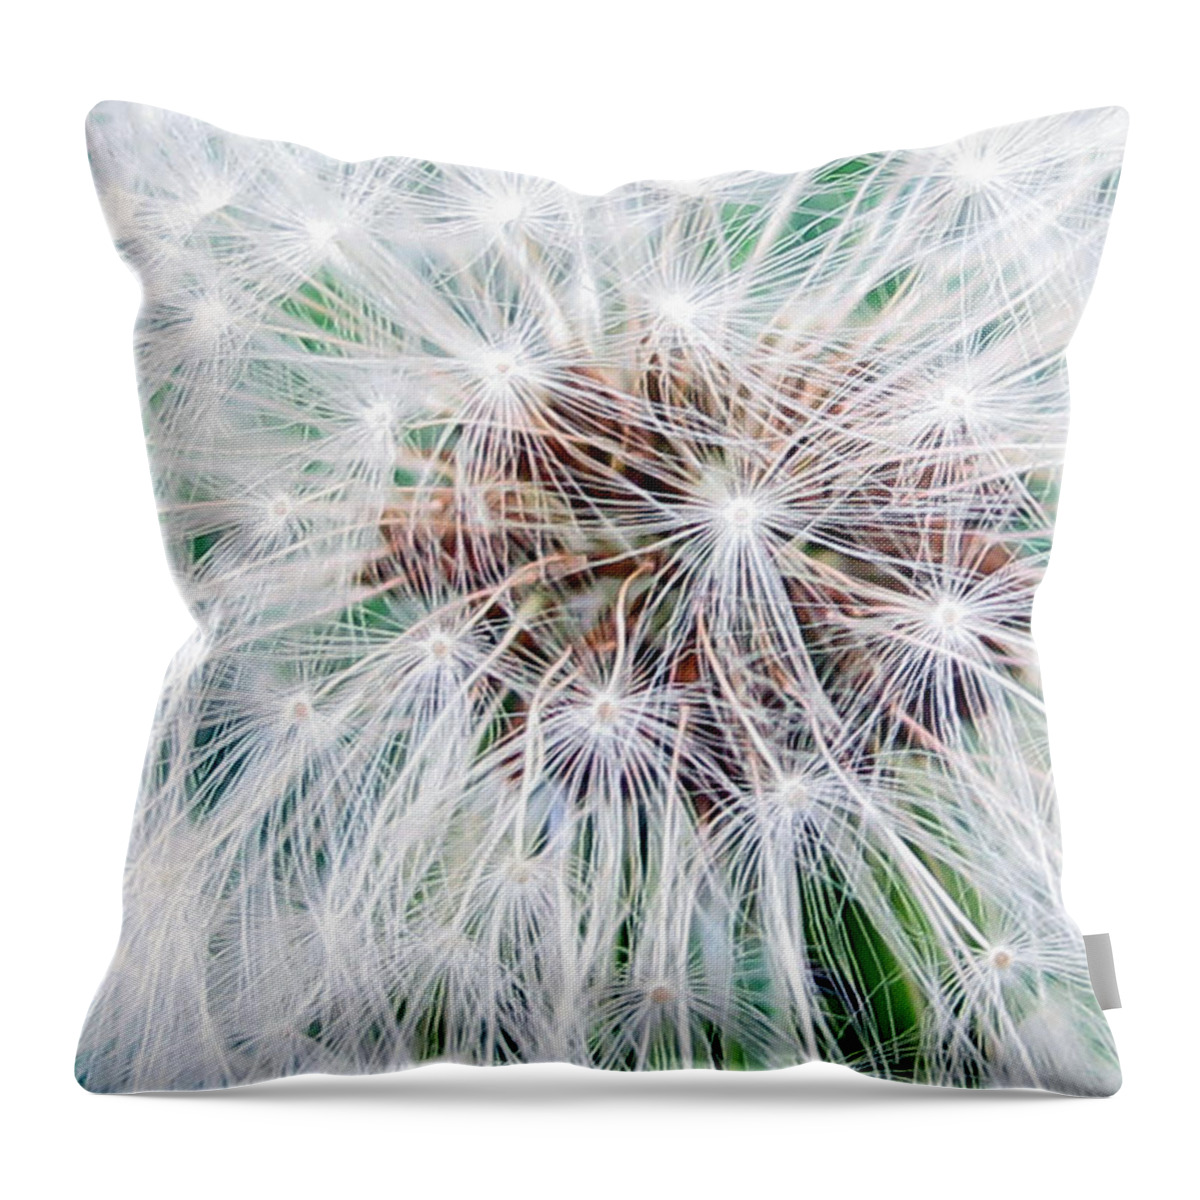 Dandilion Throw Pillow featuring the photograph Make A Wish by Kelly Holm